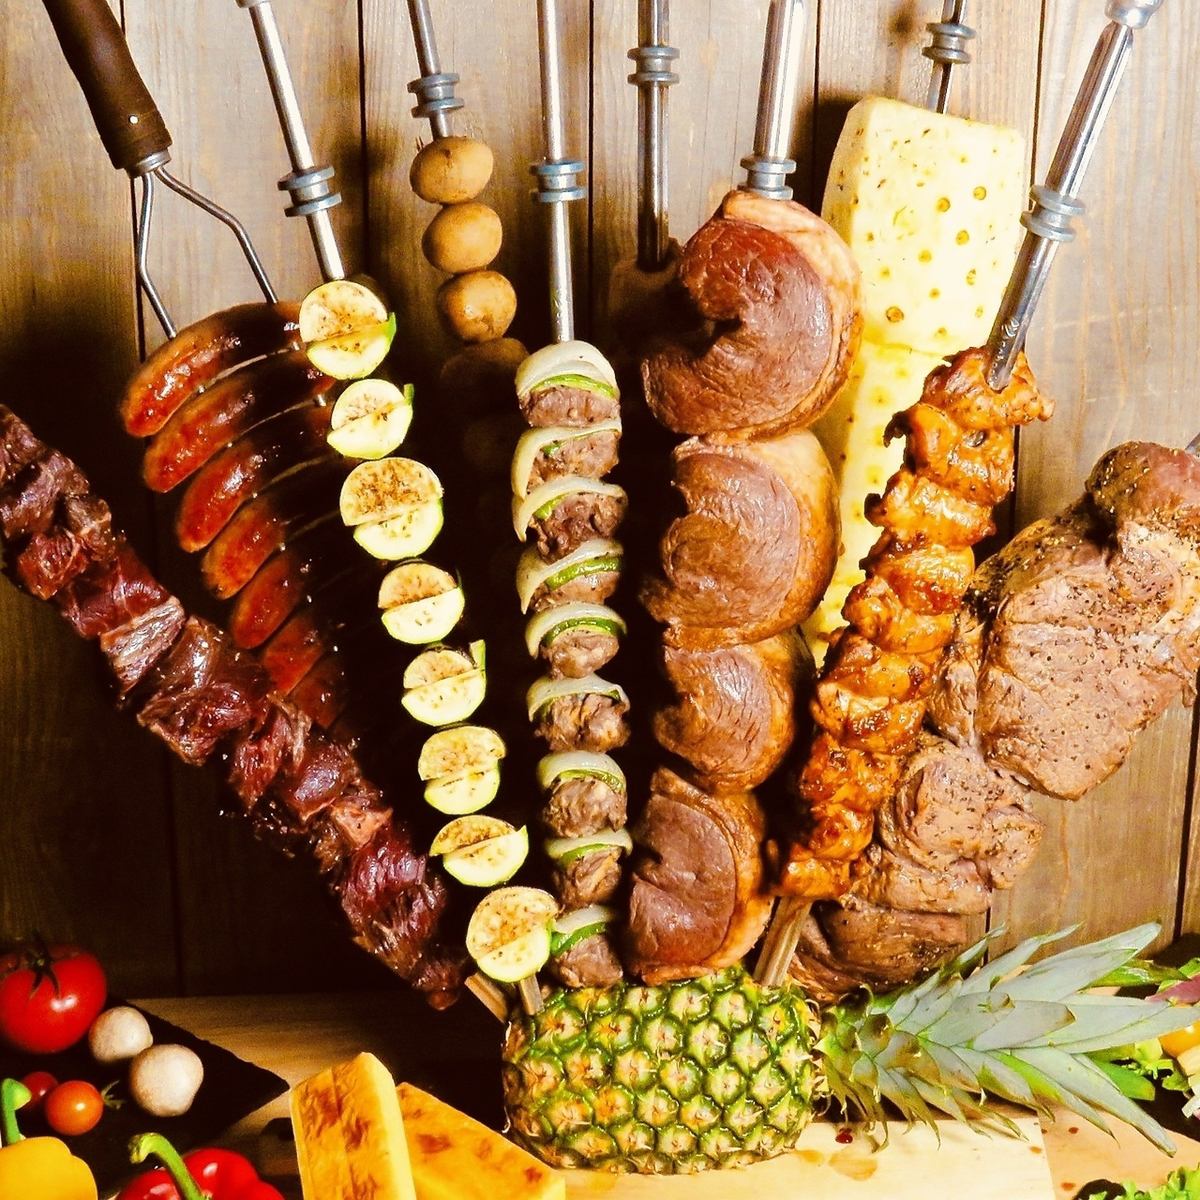 ◇All-you-can-eat churrasco★20 types in total [Variations that allow you to enjoy different flavors are great]